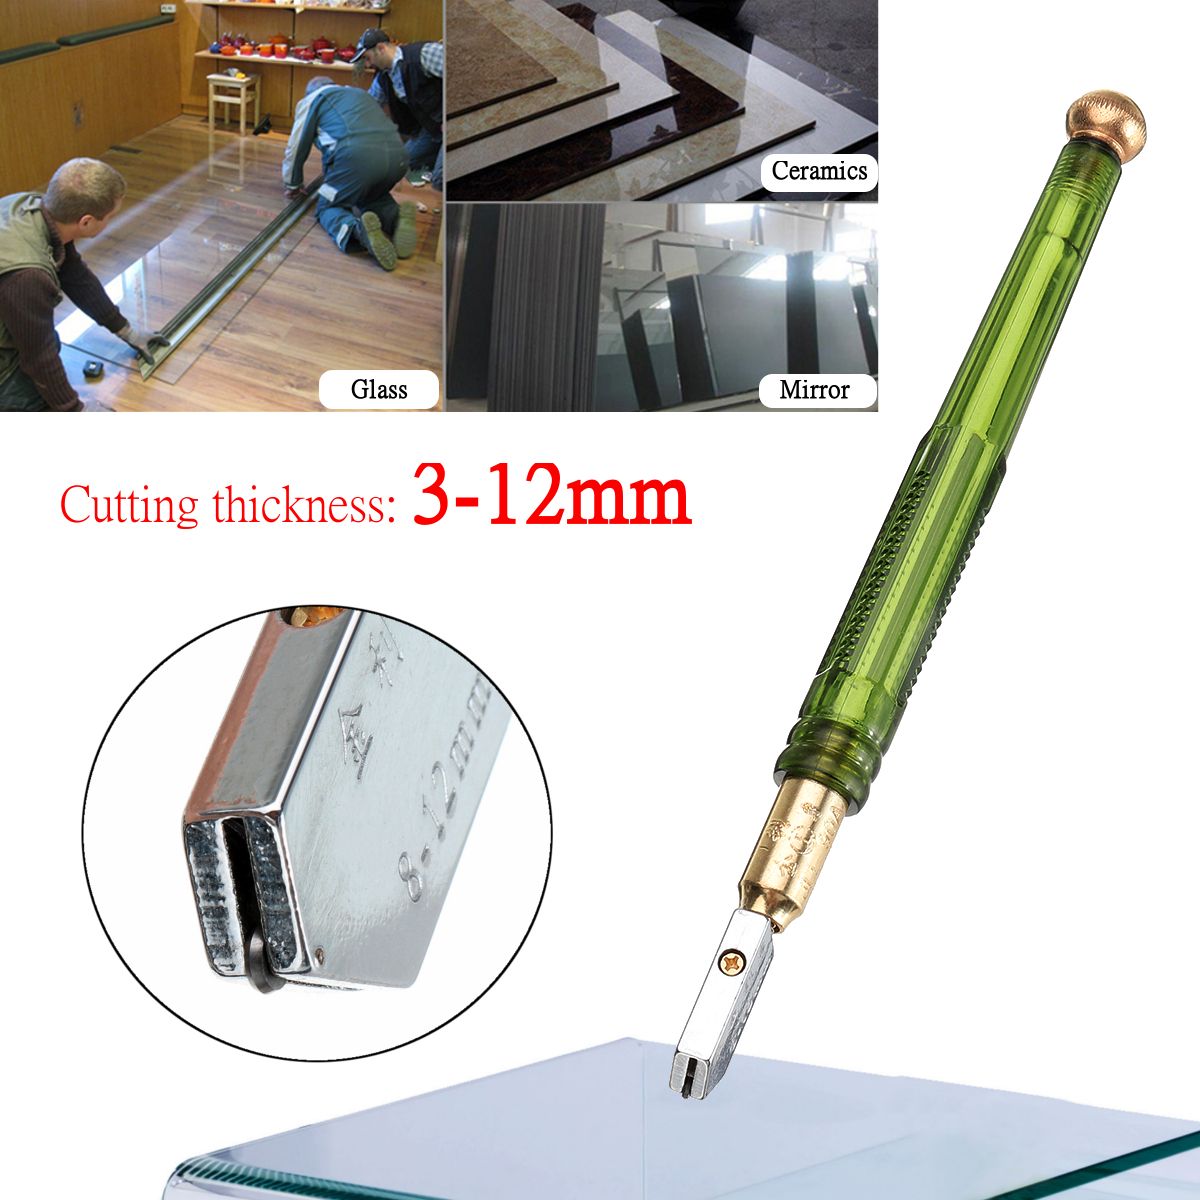 Professional-Glass-Cutter-Ceramics-Mirror-Cutting-Tipped-Glass-Cutting-Tool-with-Anti-Slip-Handle-1307224